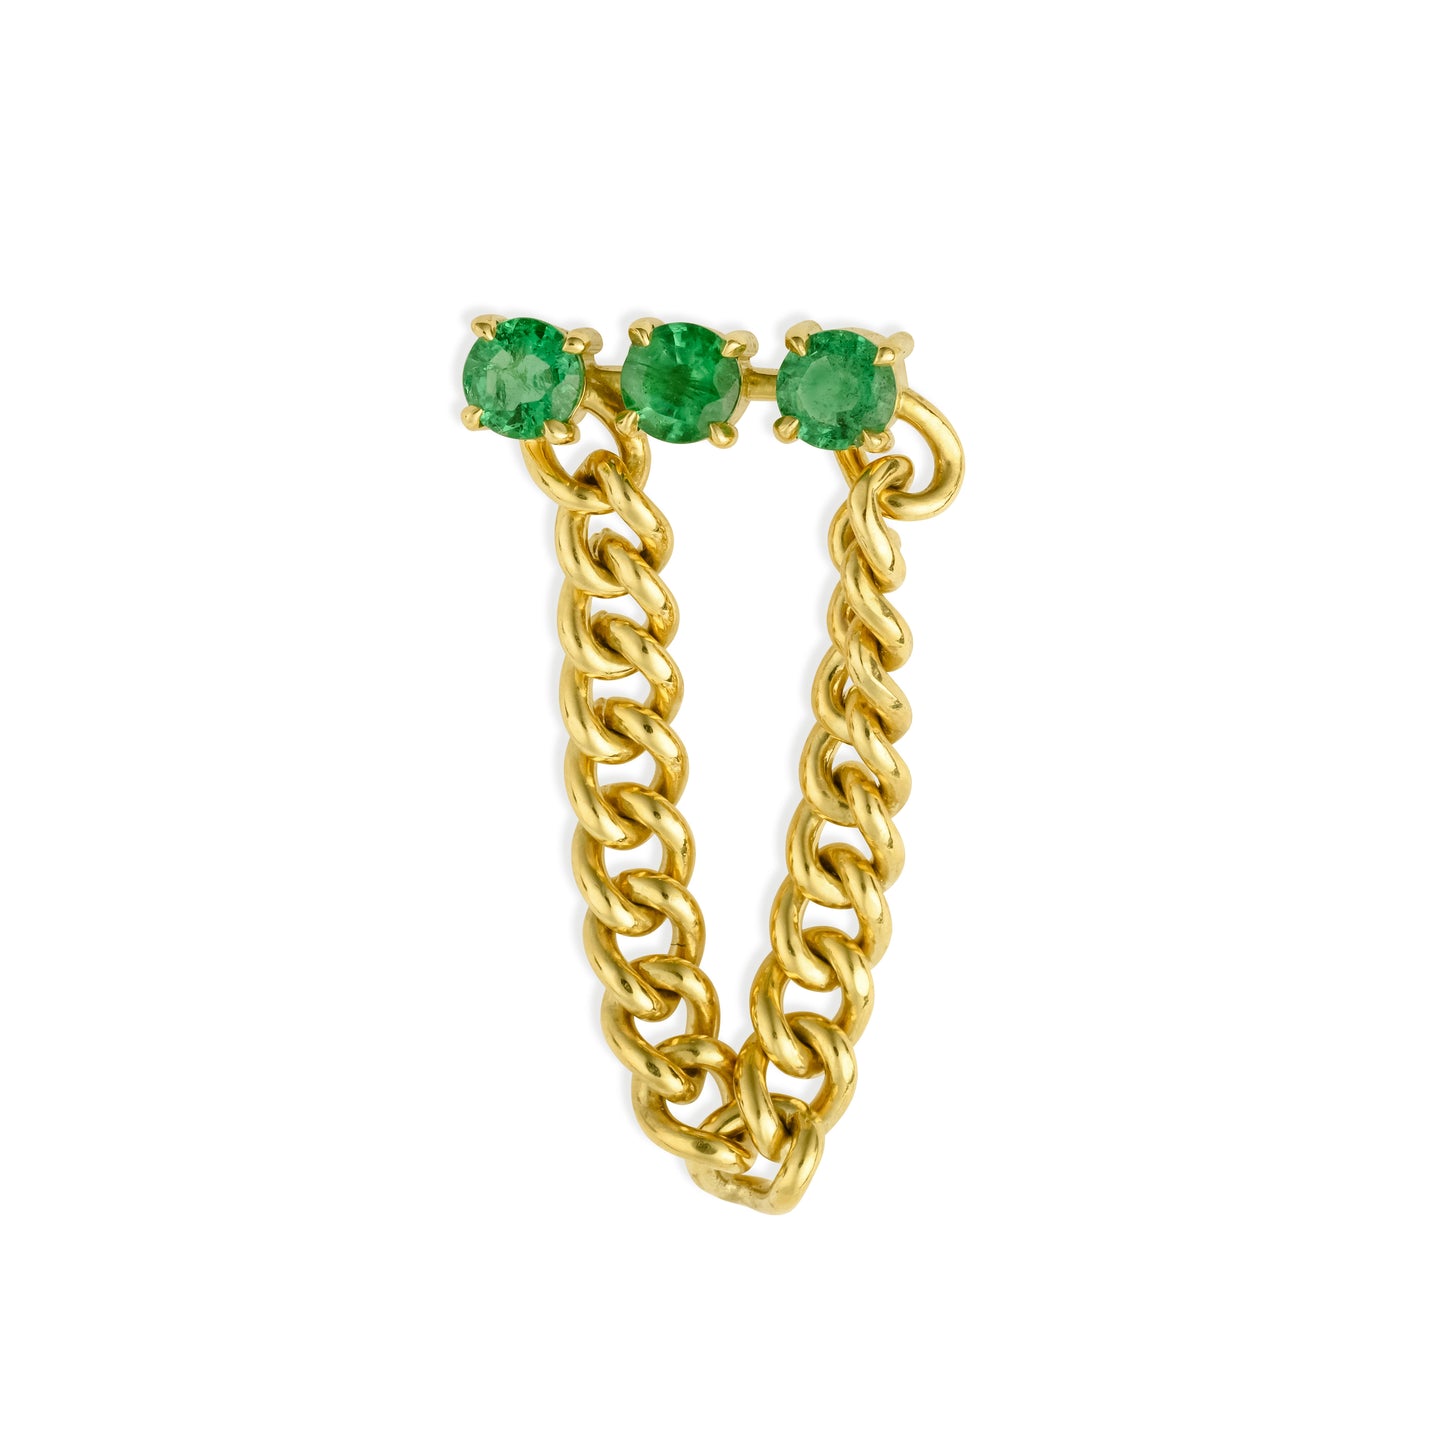 Load image into Gallery viewer, Jemma Wynne Tojours Single Stud with Zambian Emerald and Draped Chain
